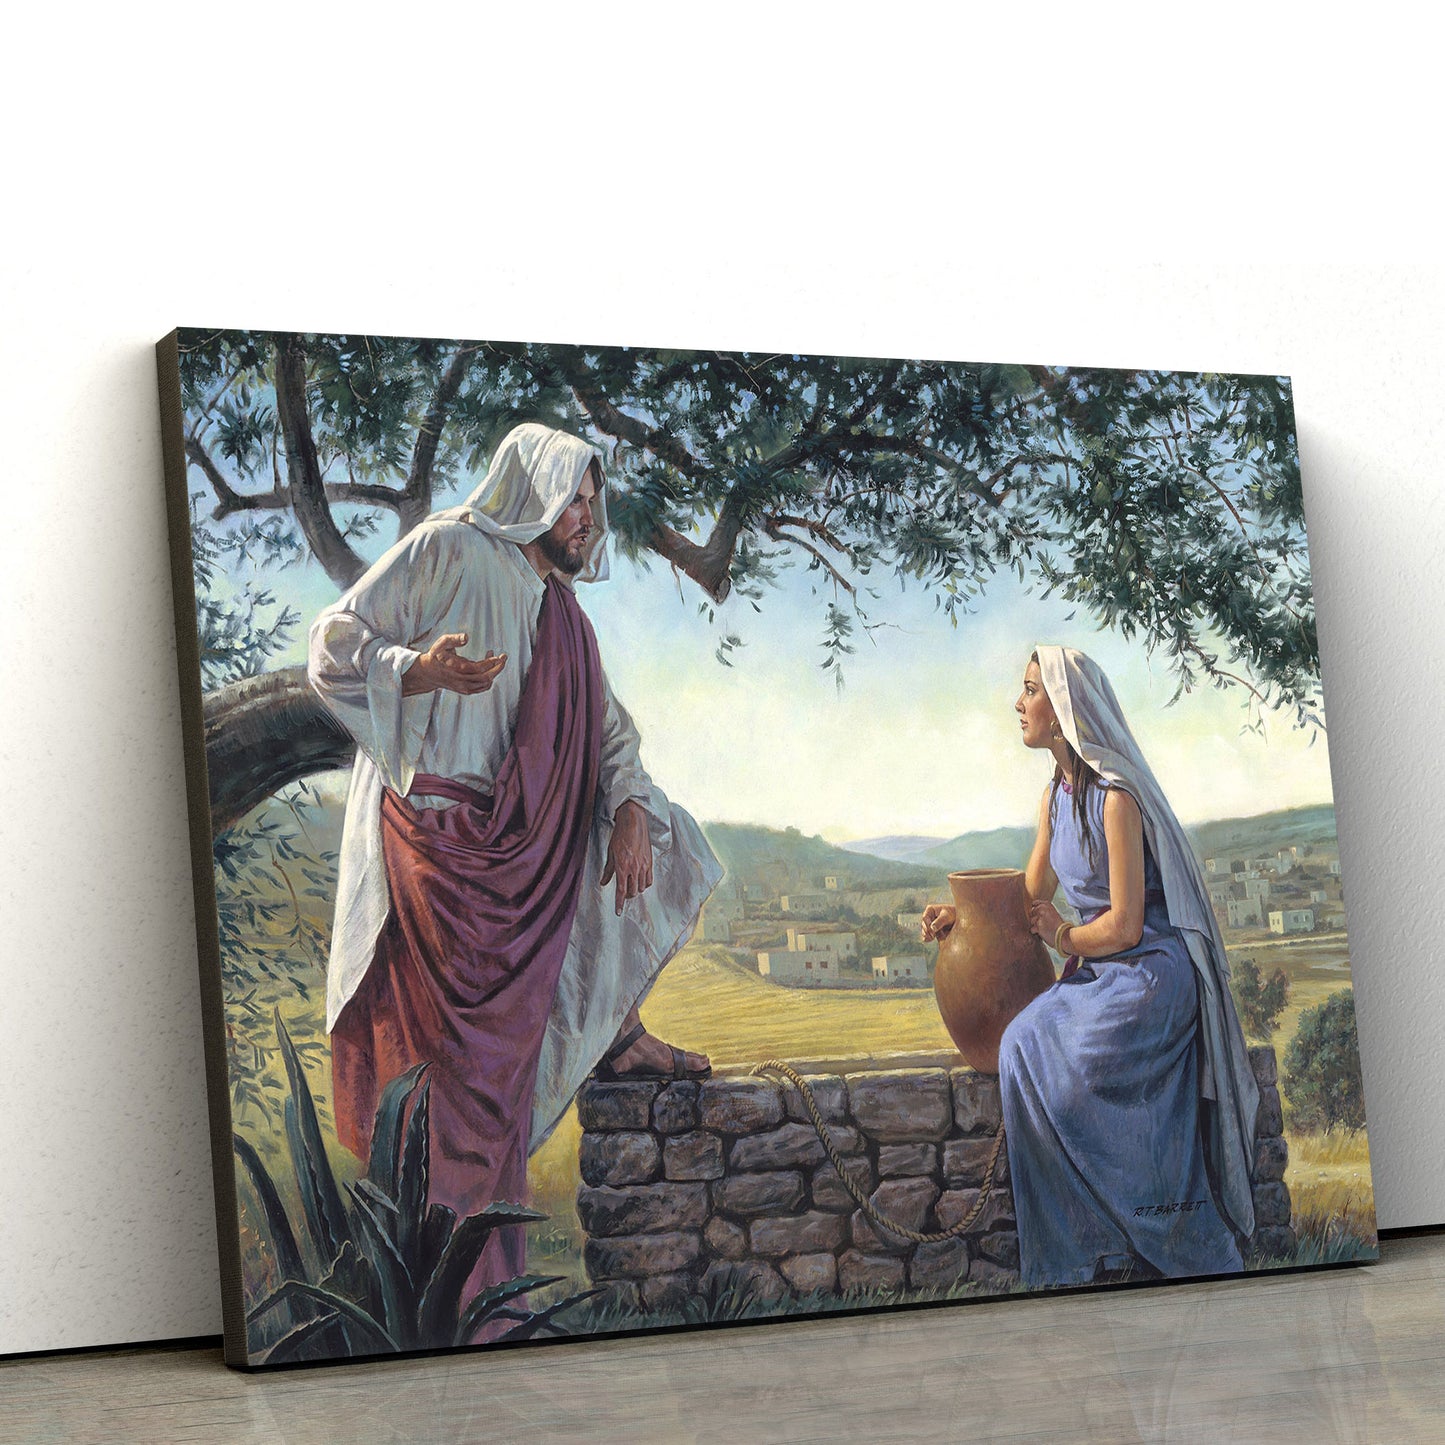 Woman At The Well Canvas Picture - Jesus Canvas Wall Art - Christian Wall Art